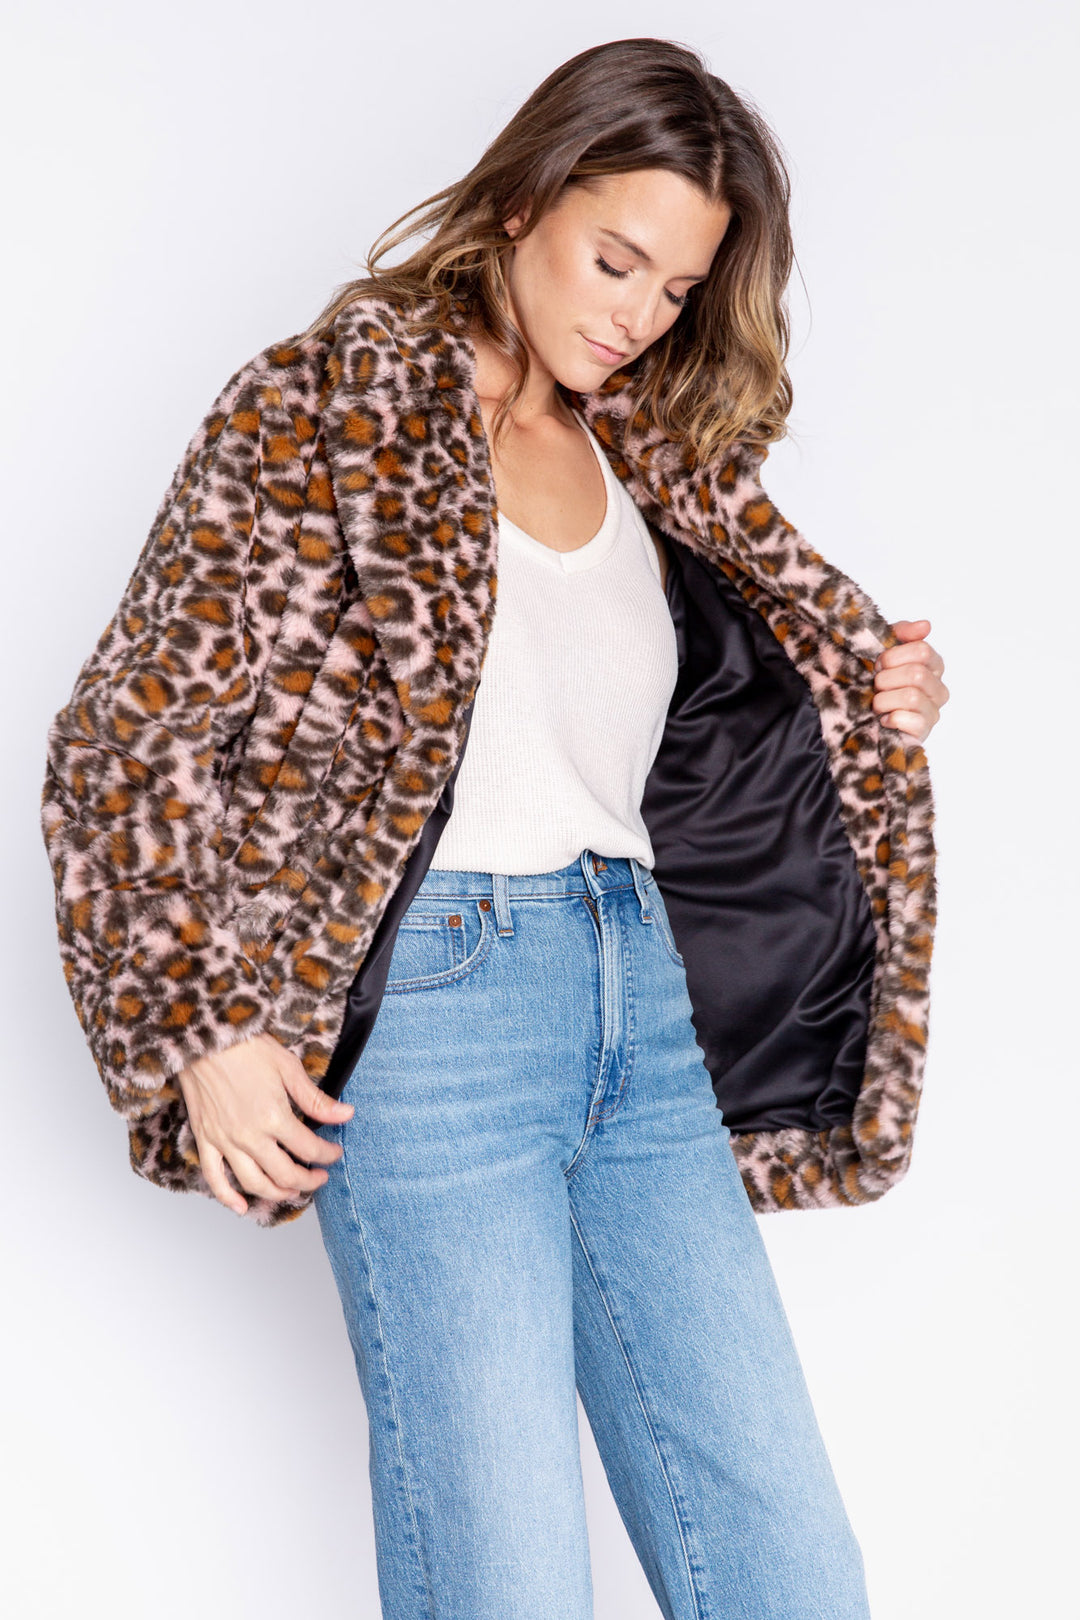 Faux fur coat in pale pink-black-brown leopard print. Fully lined with inside print. Button-front close. (6982898679908)